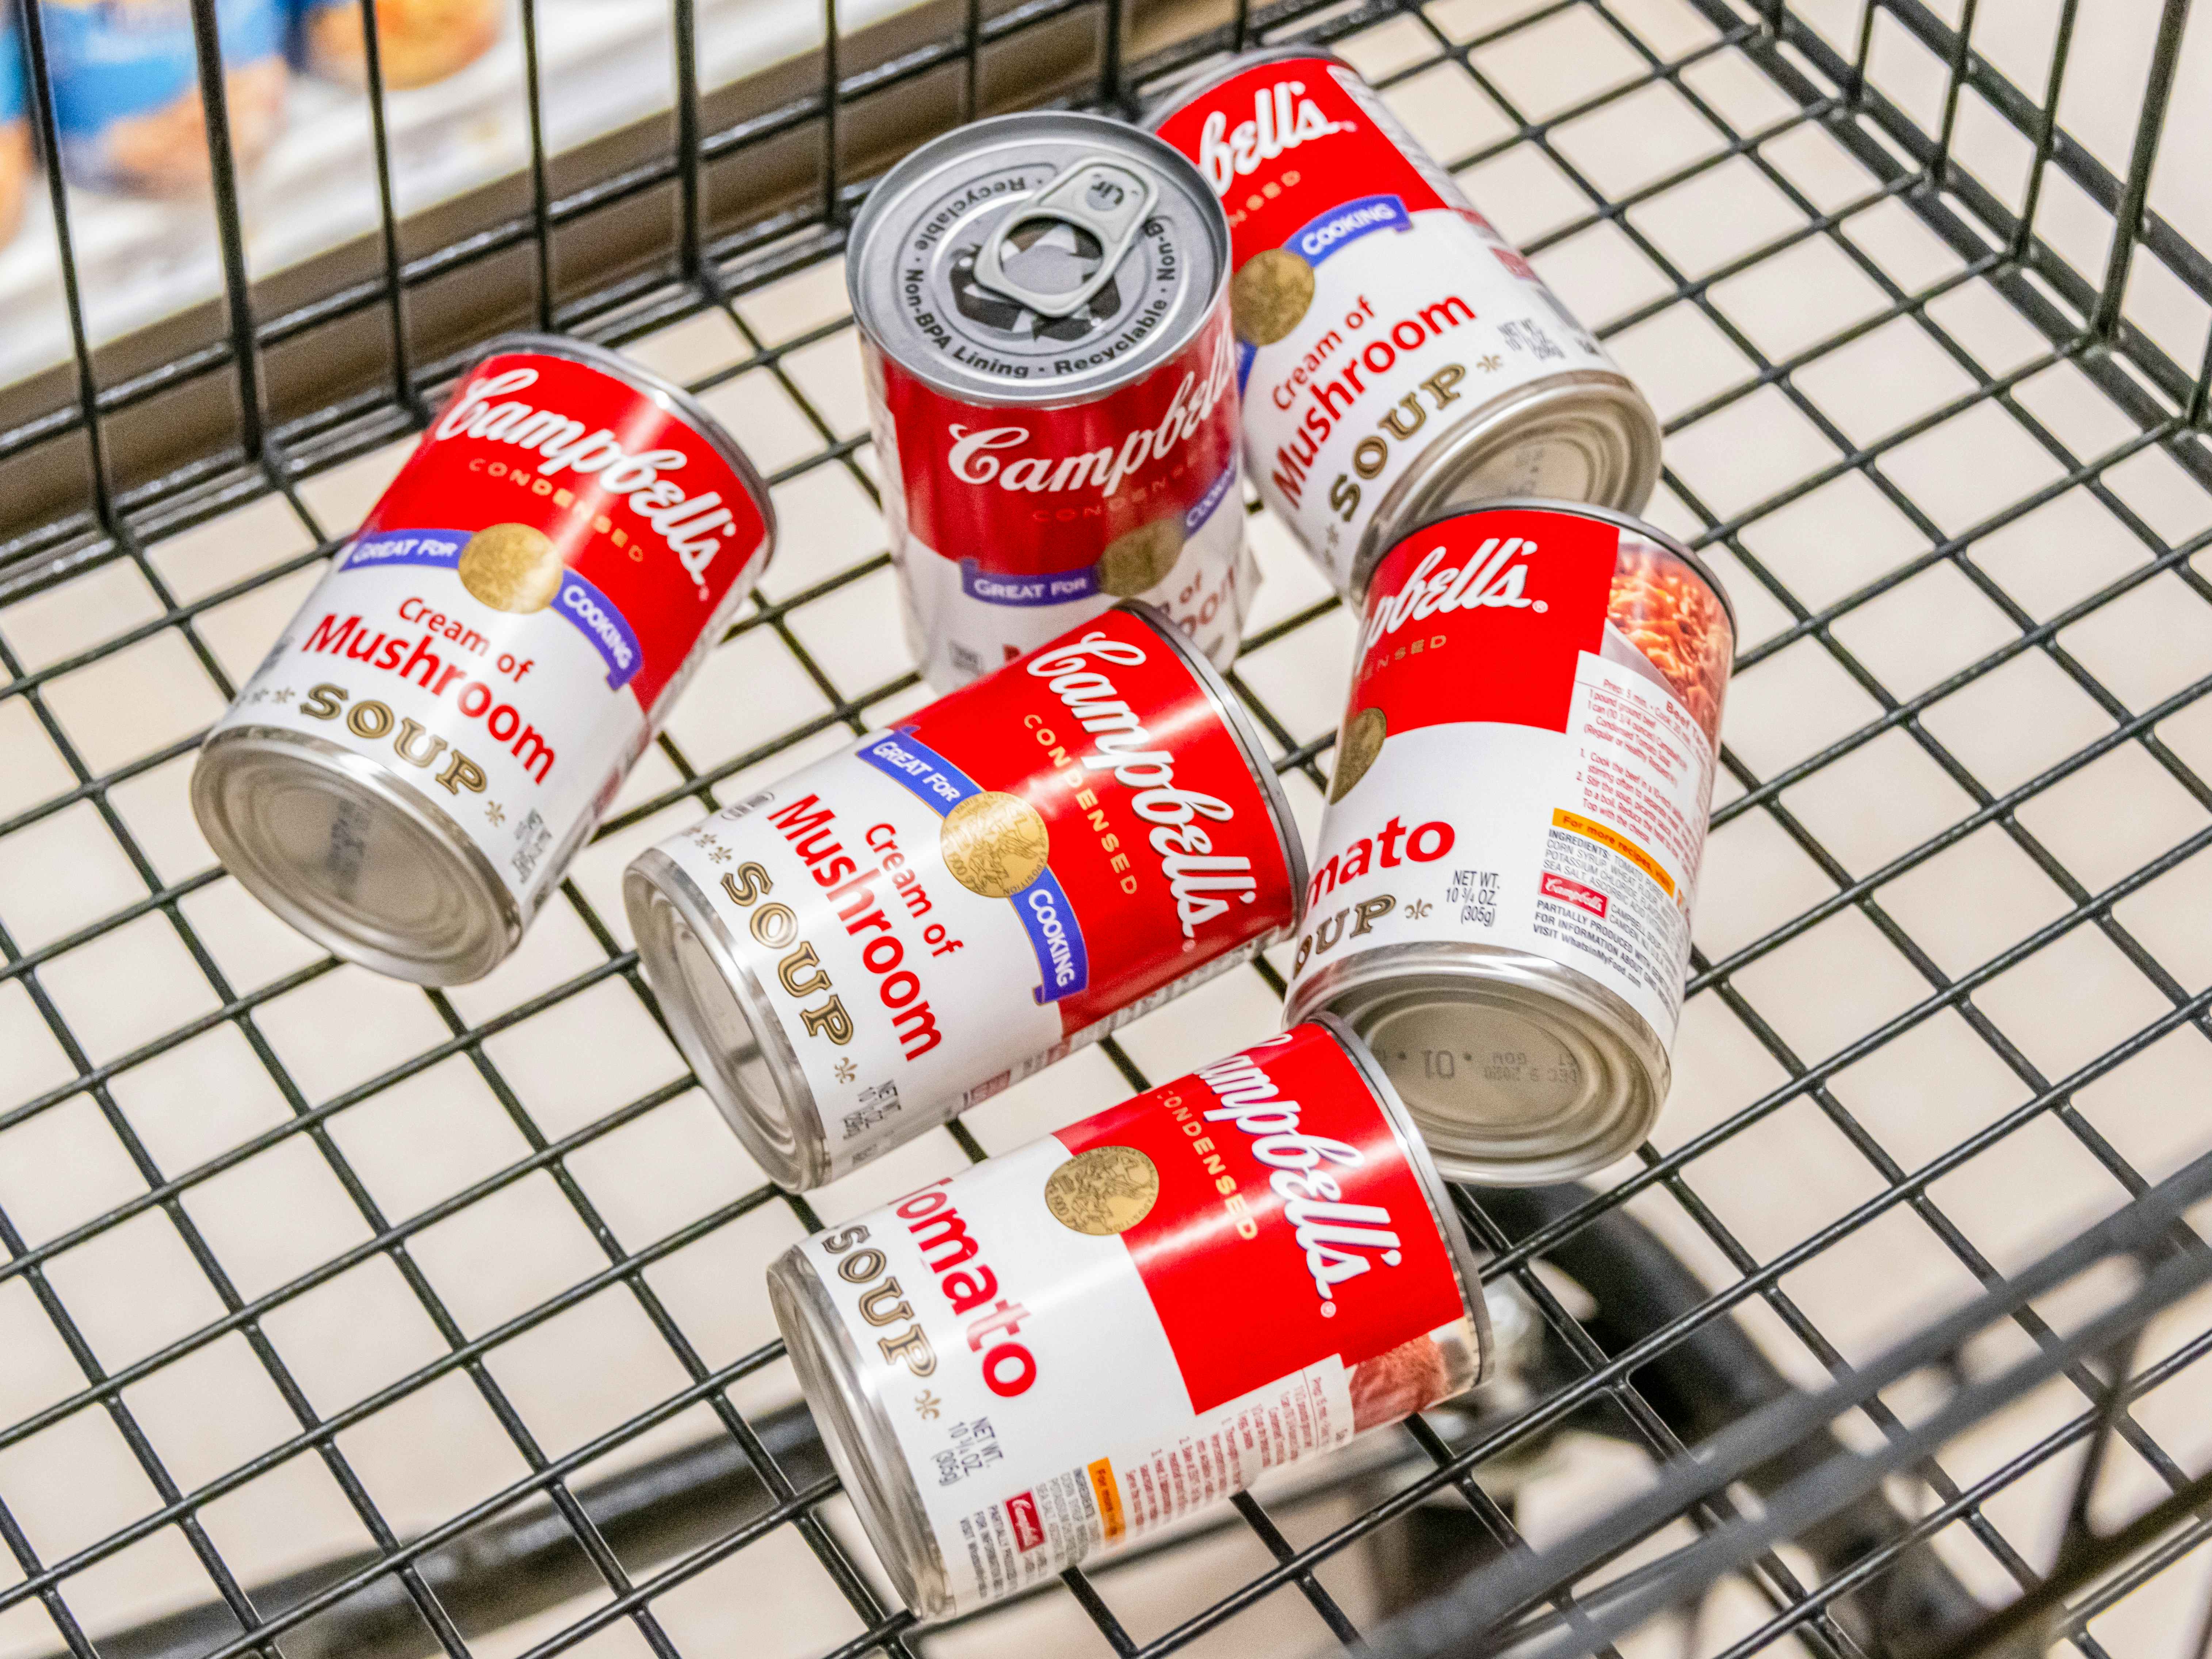 Assorted cans of Campbells brand soup in a cart 